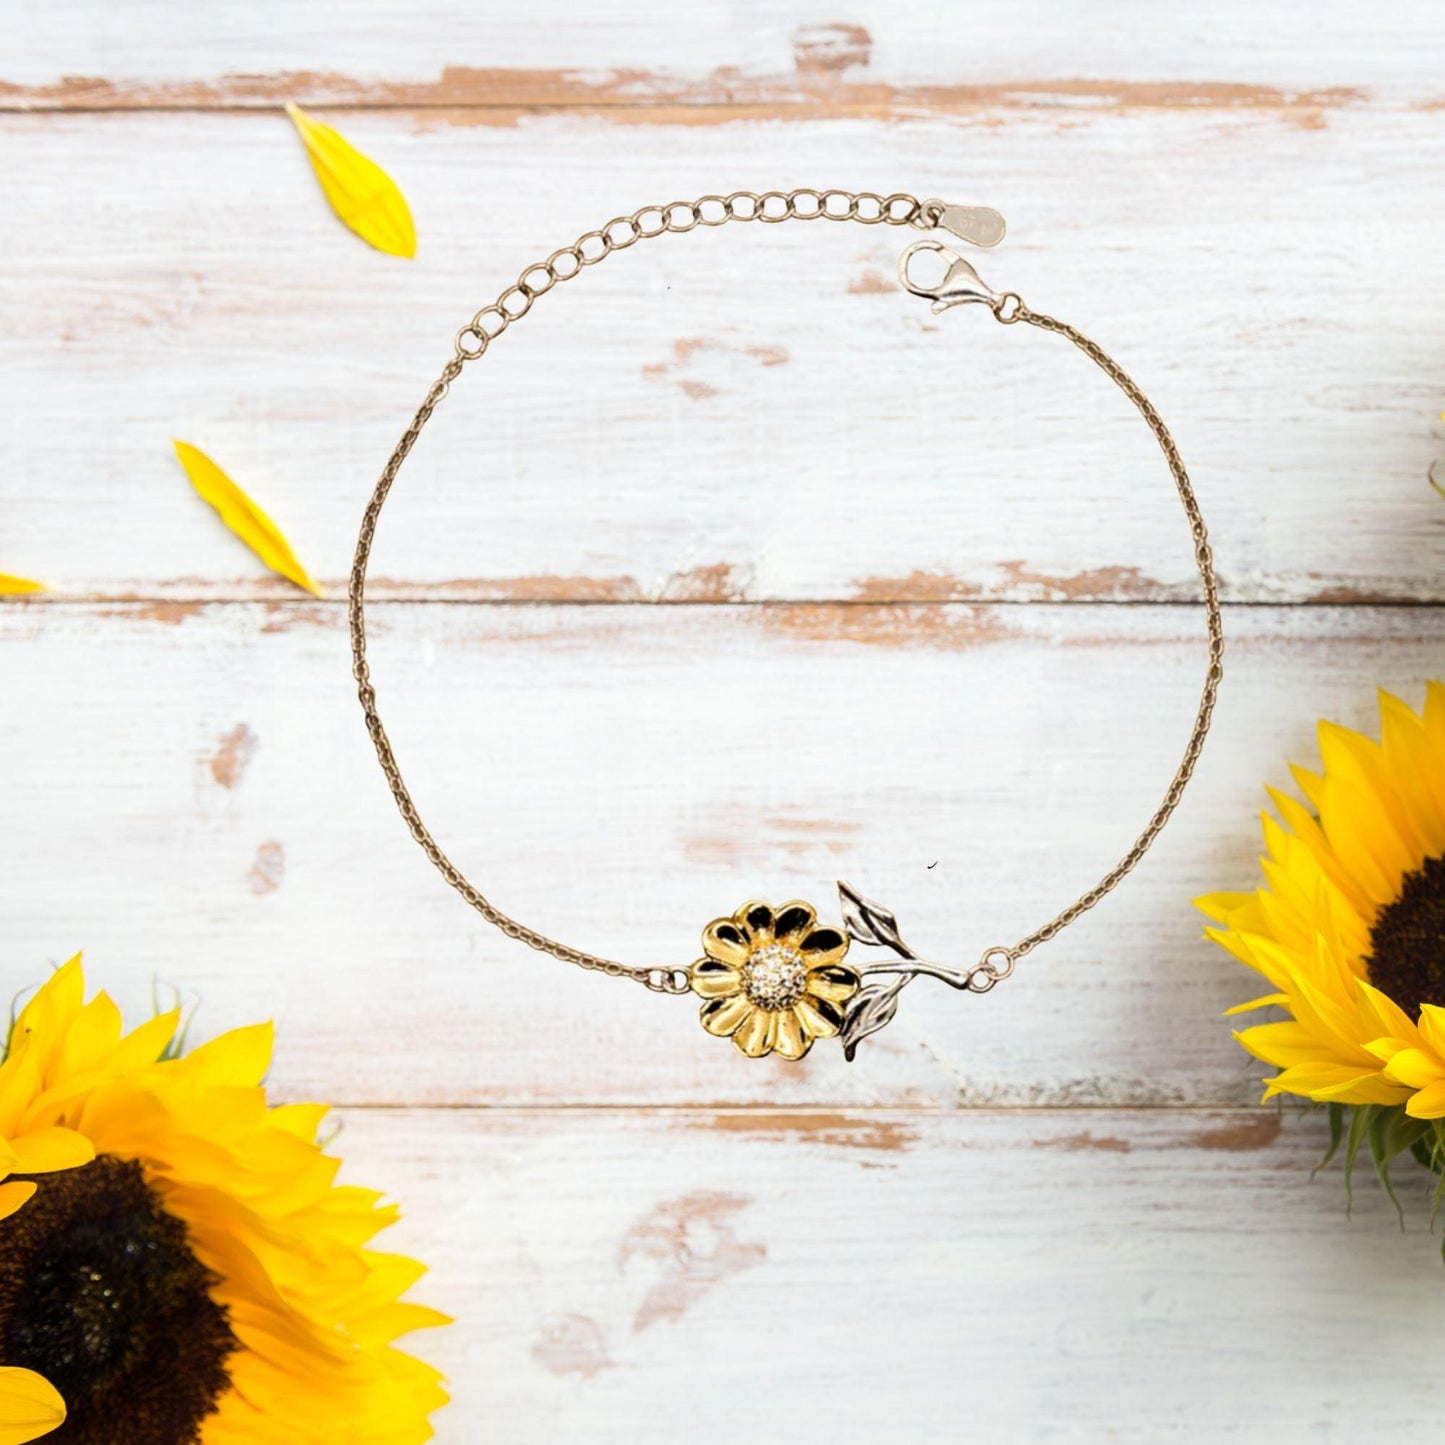 Physical Therapist Sunflower Bracelet - Thanks for being who you are - Birthday Christmas Jewelry Gifts Coworkers Colleague Boss - Mallard Moon Gift Shop